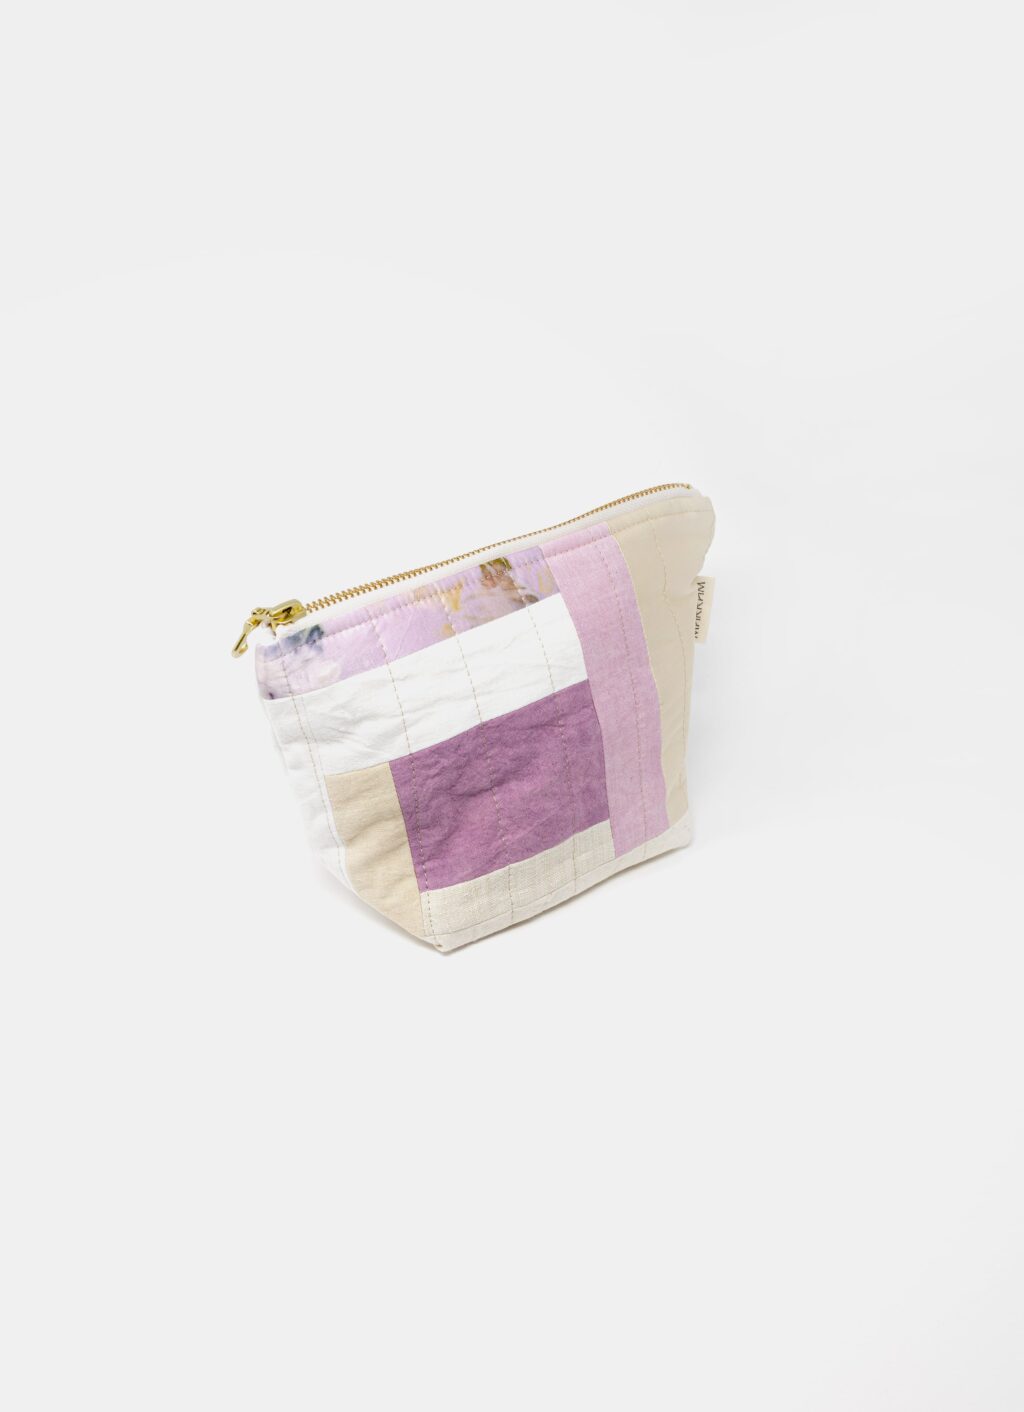 Marram - Patchwork Zipper Pouch - Plant dyed - Meadows collection - Warm pinks and Lavender tones